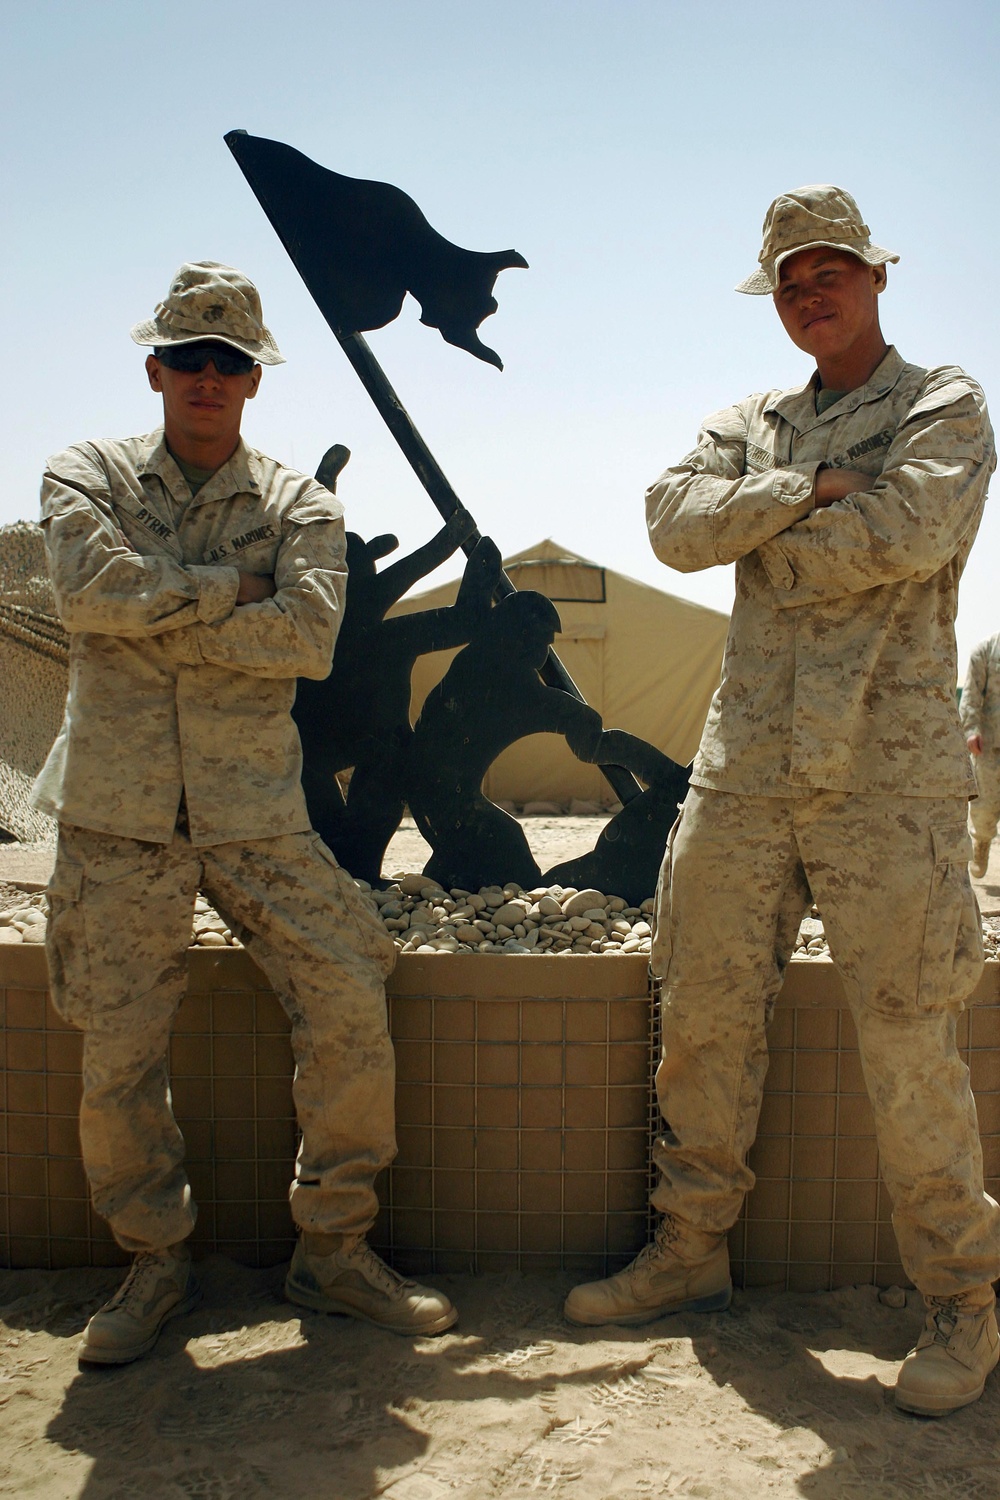 Marines build motivation with recognizable image